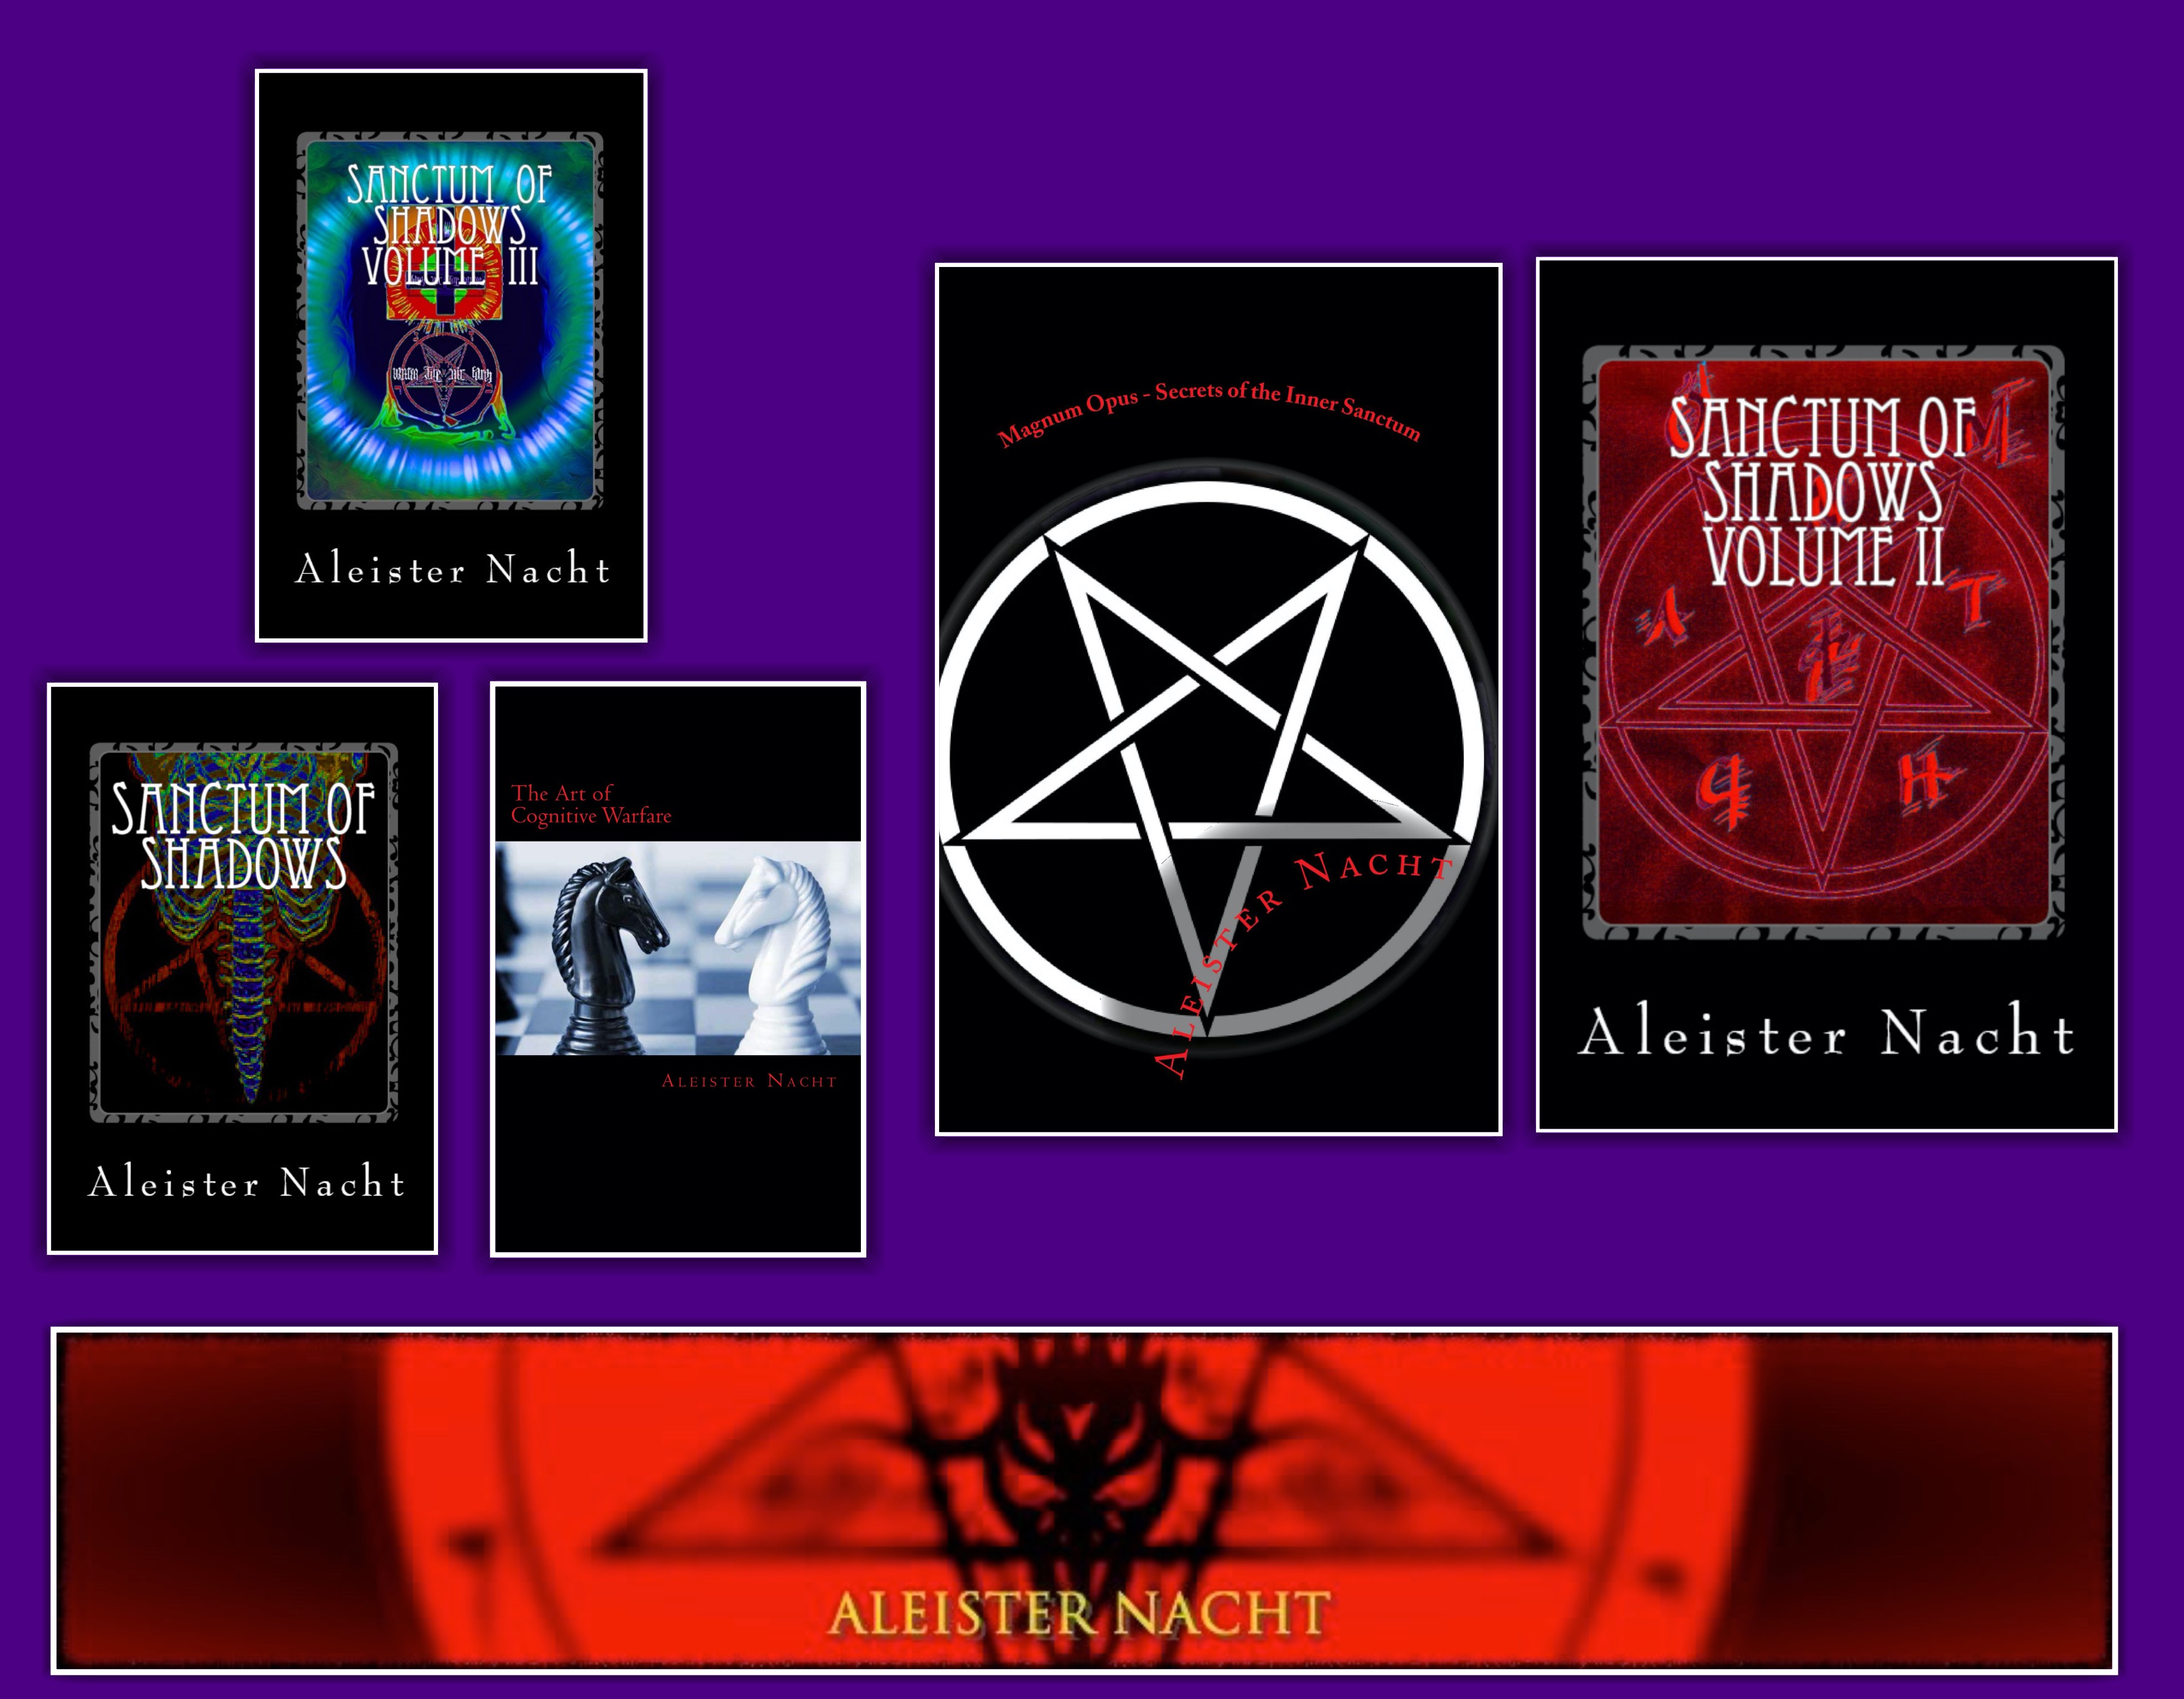 New audiobooks by Aleister Nacht